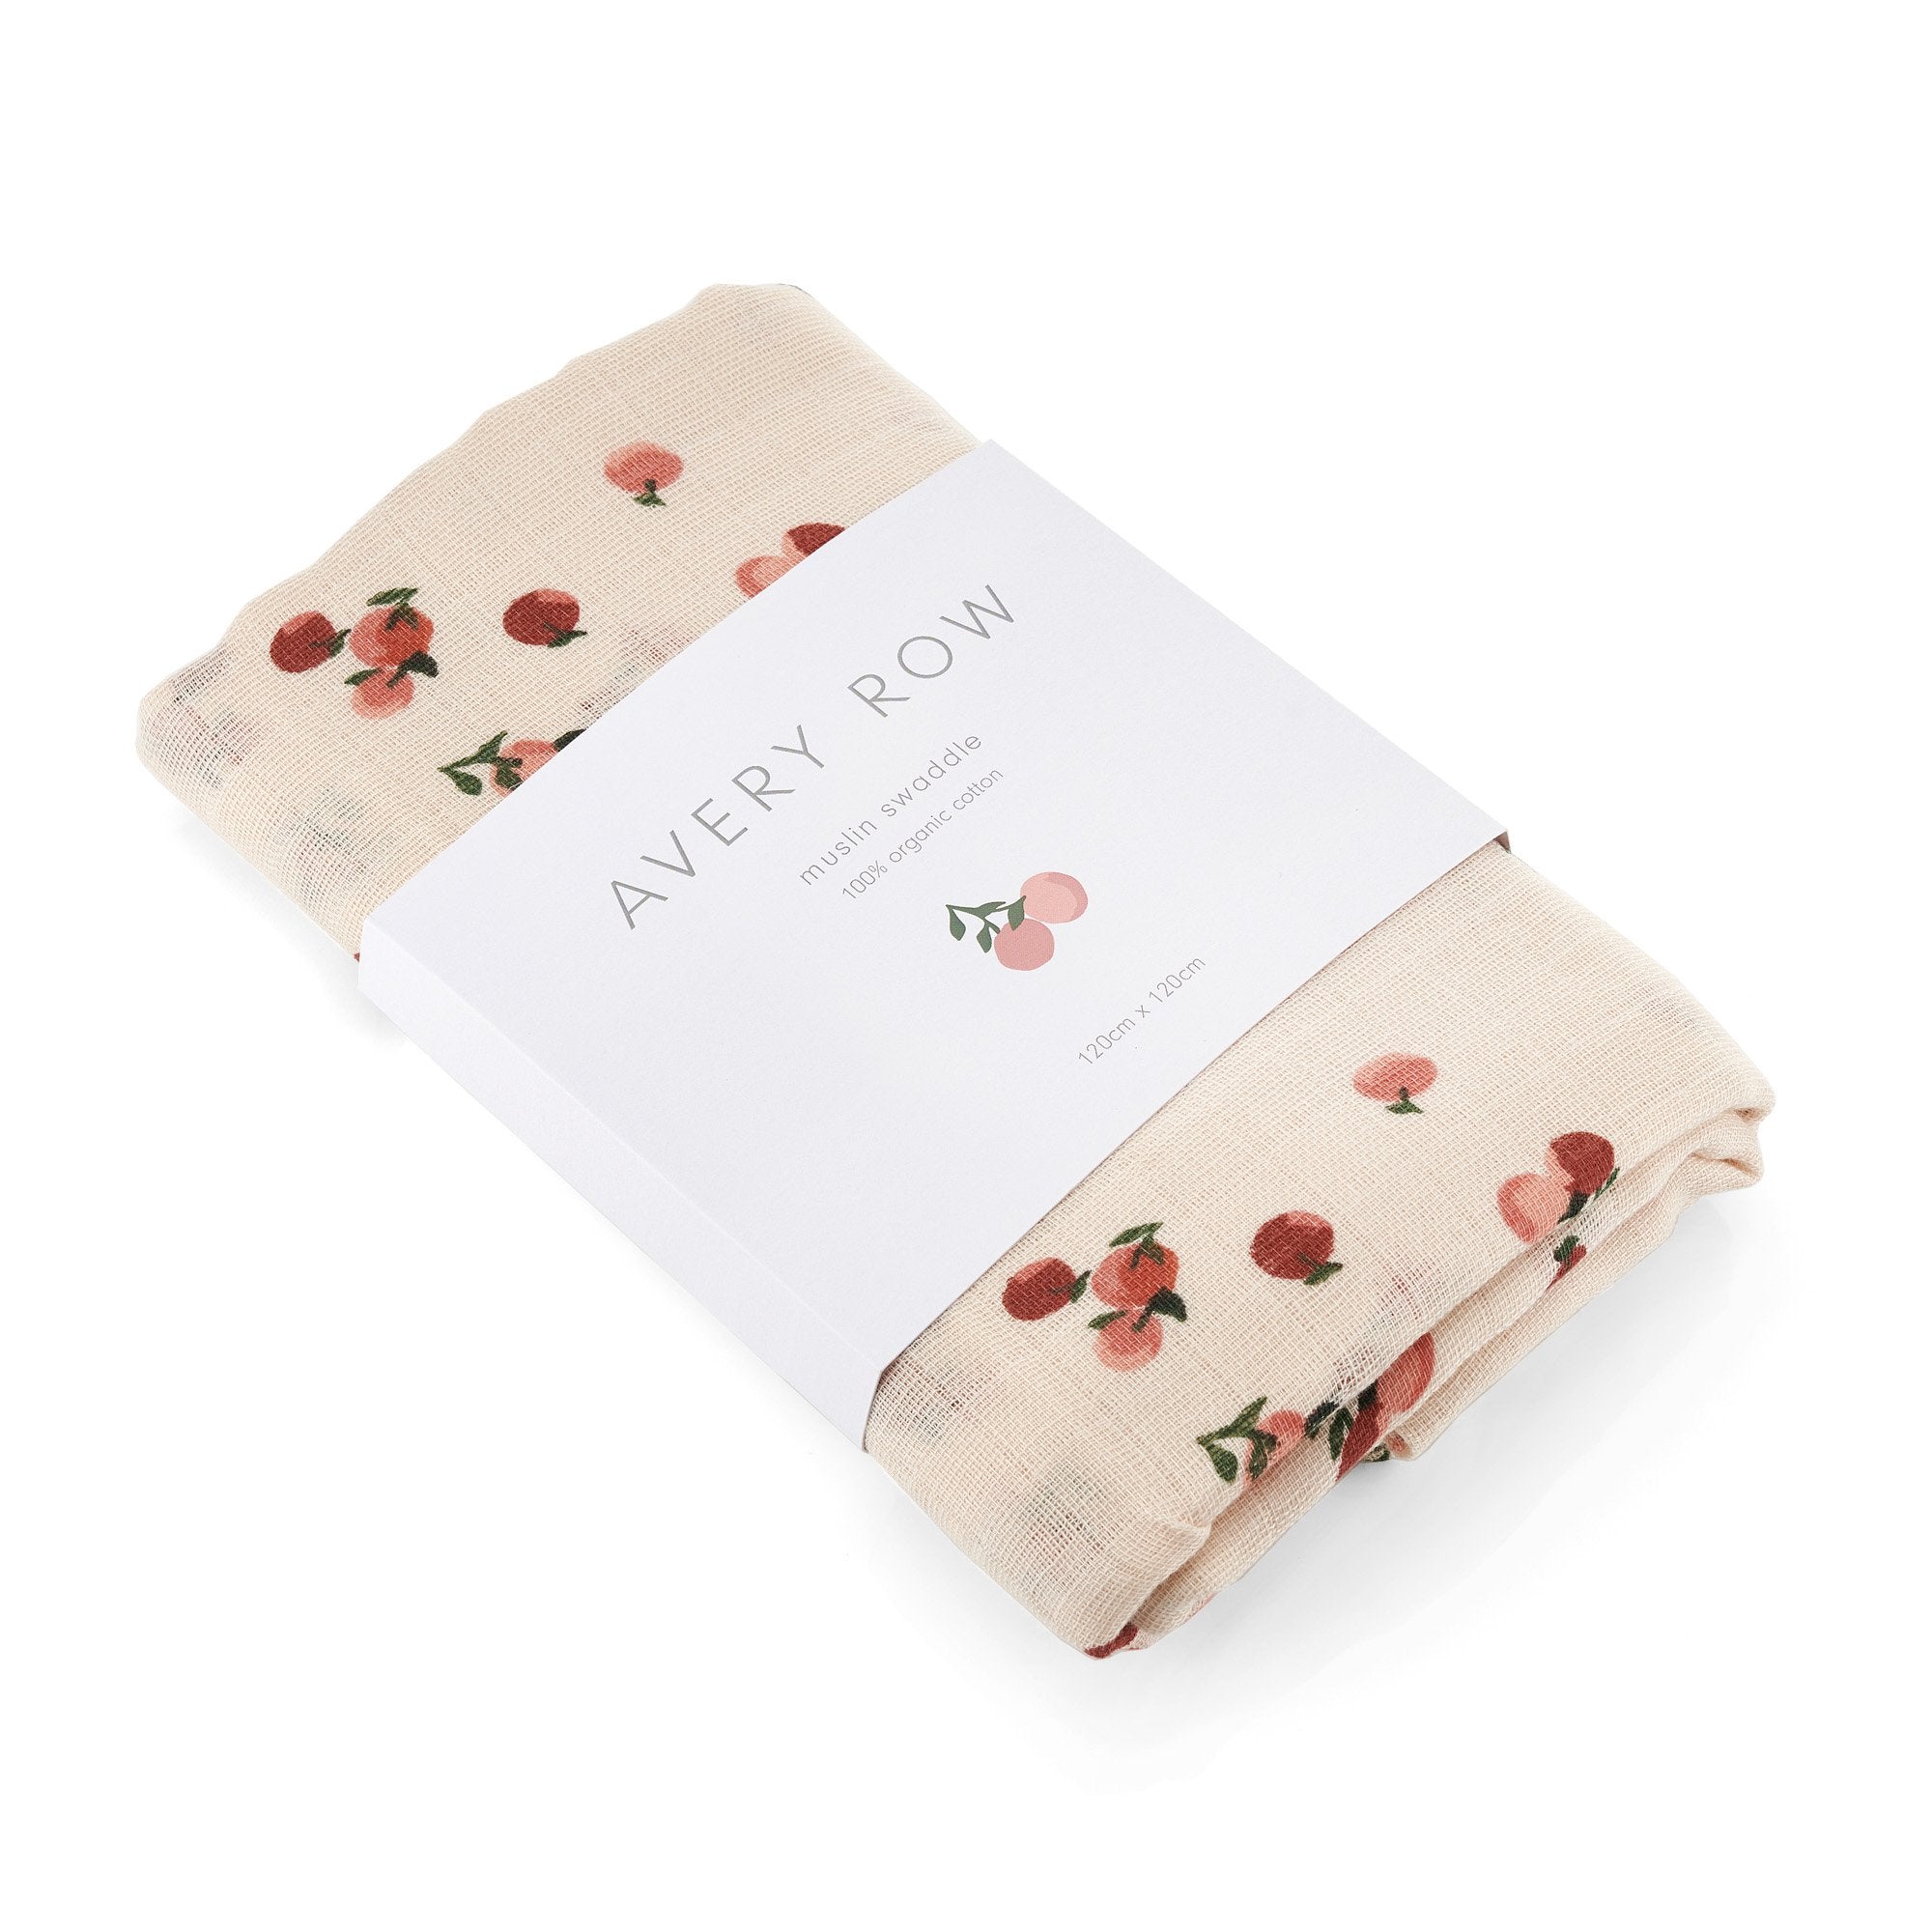 This Peaches design 100% GOTS organic cotton baby muslin swaddle blanket is extra large and incredibly soft.